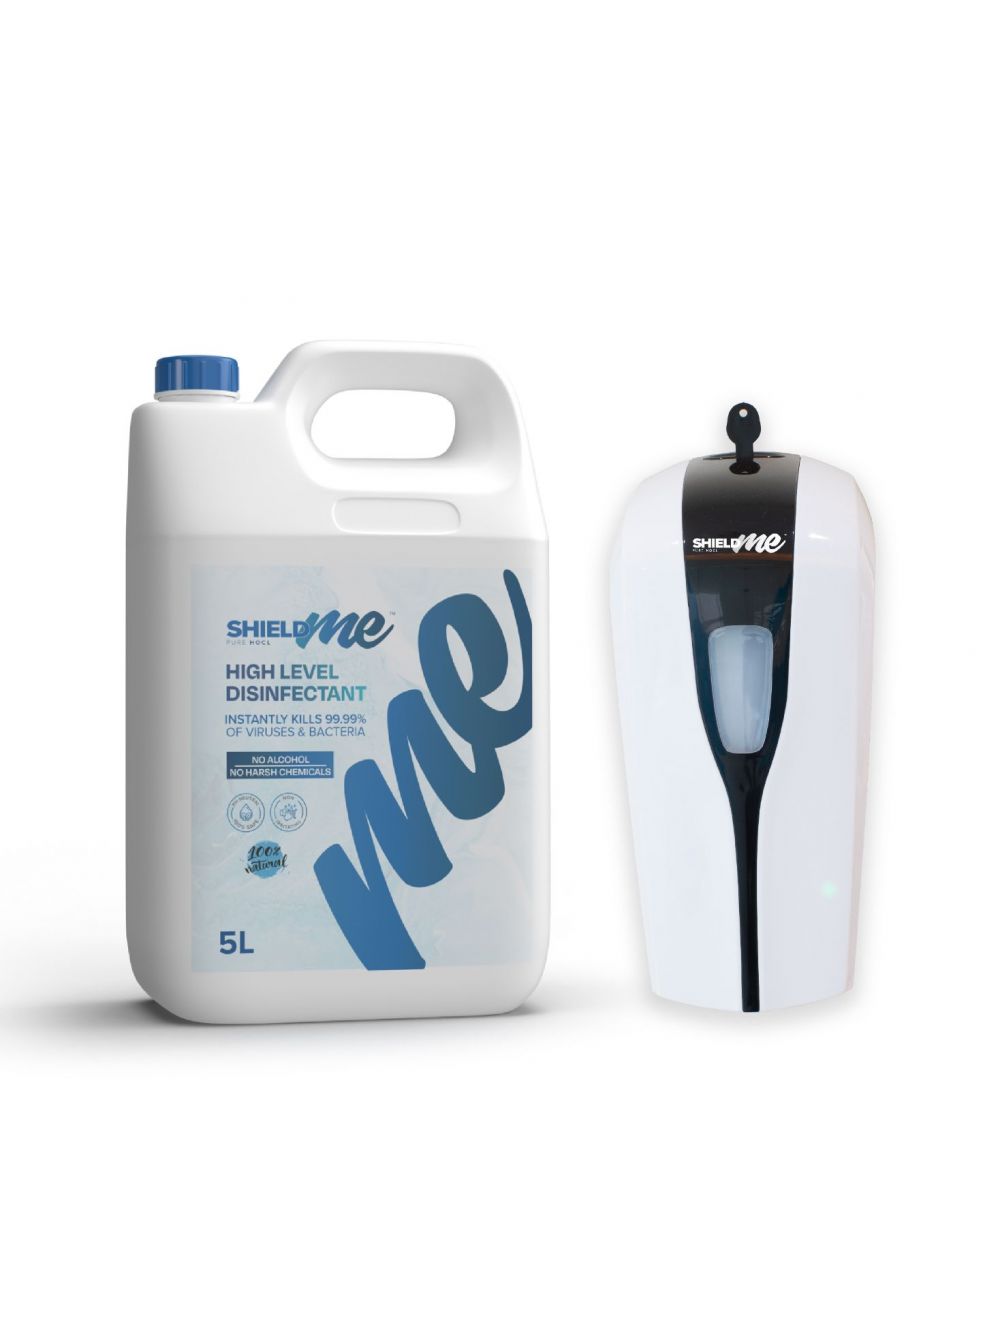 SHIELDme Automatic Hand Disinfection Dispenser & 5 Litres High Level Sanitizer-KN-HCVY-UO9Z